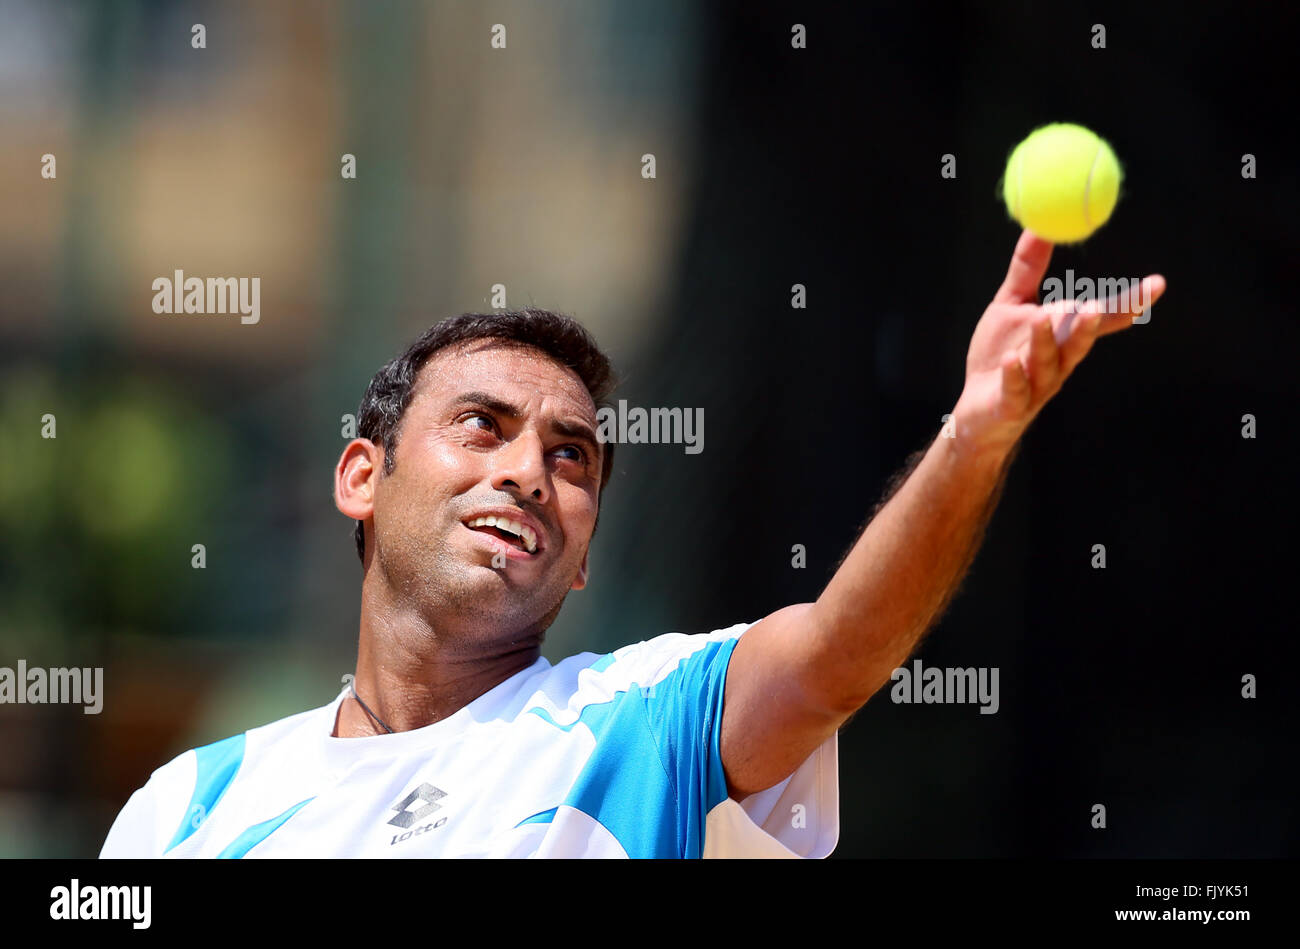 (160304) -- COLOMBO, March 4, 2016 (Xinhua) -- Aqeel Khan of Pakistan serves during his men's single match against Zhang Ze of China during their Davis Cup World Asia/Oceania Zone Group l first round single tennis match in Colombo, Sri Lanka, on March 4, 2016. Zhang won 3-0. (Xinhua/Li Peng) Stock Photo